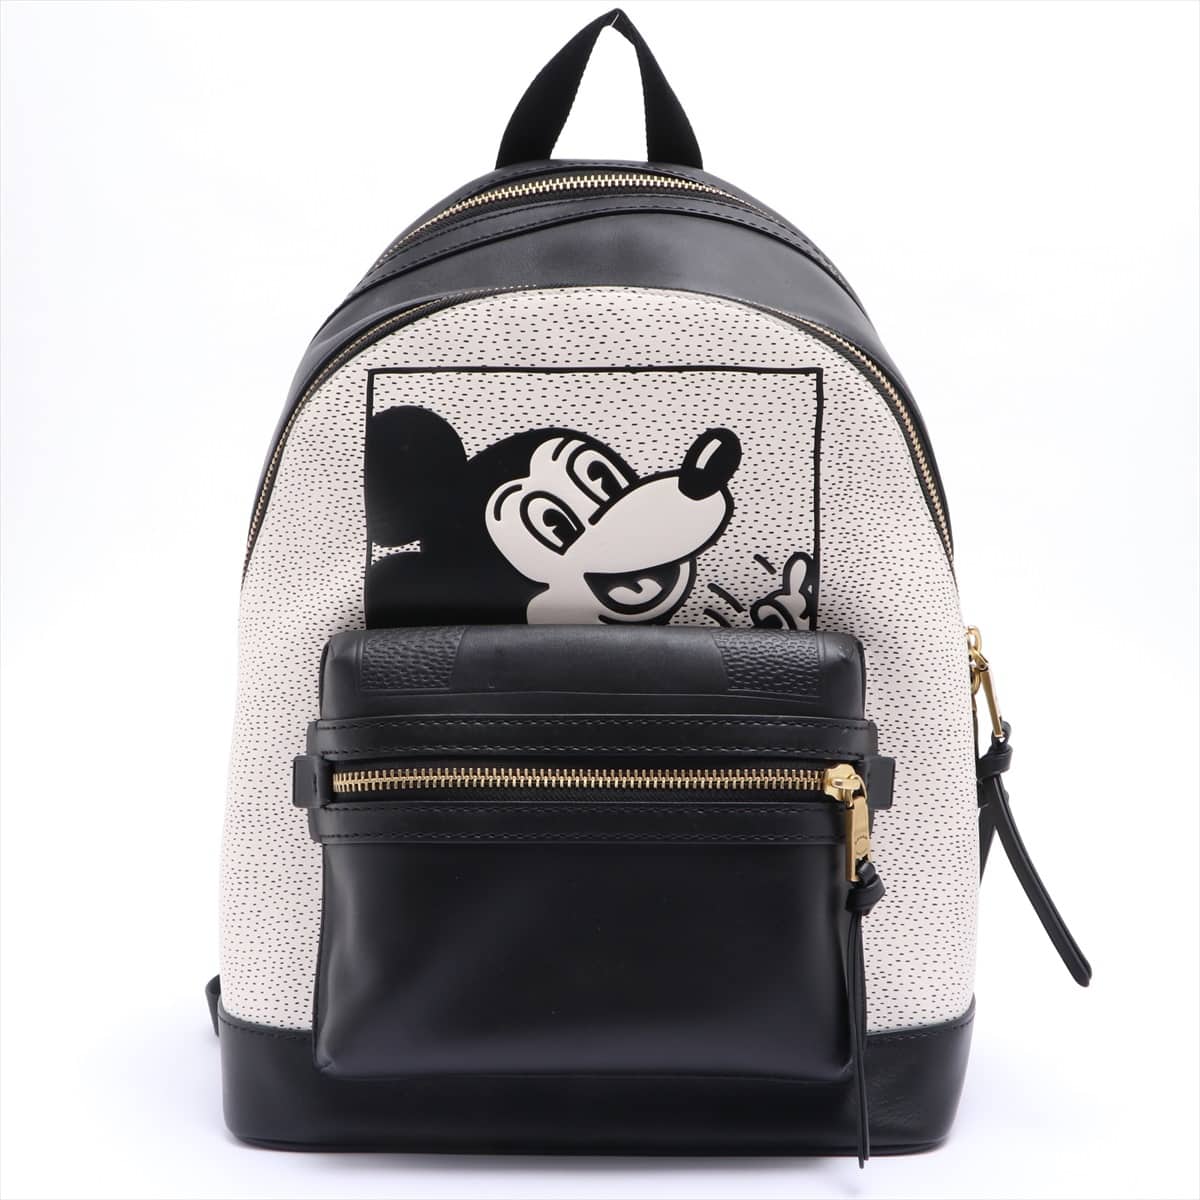 Coach x Disney Leather Backpack Black 5228 Keith Haring collaboration